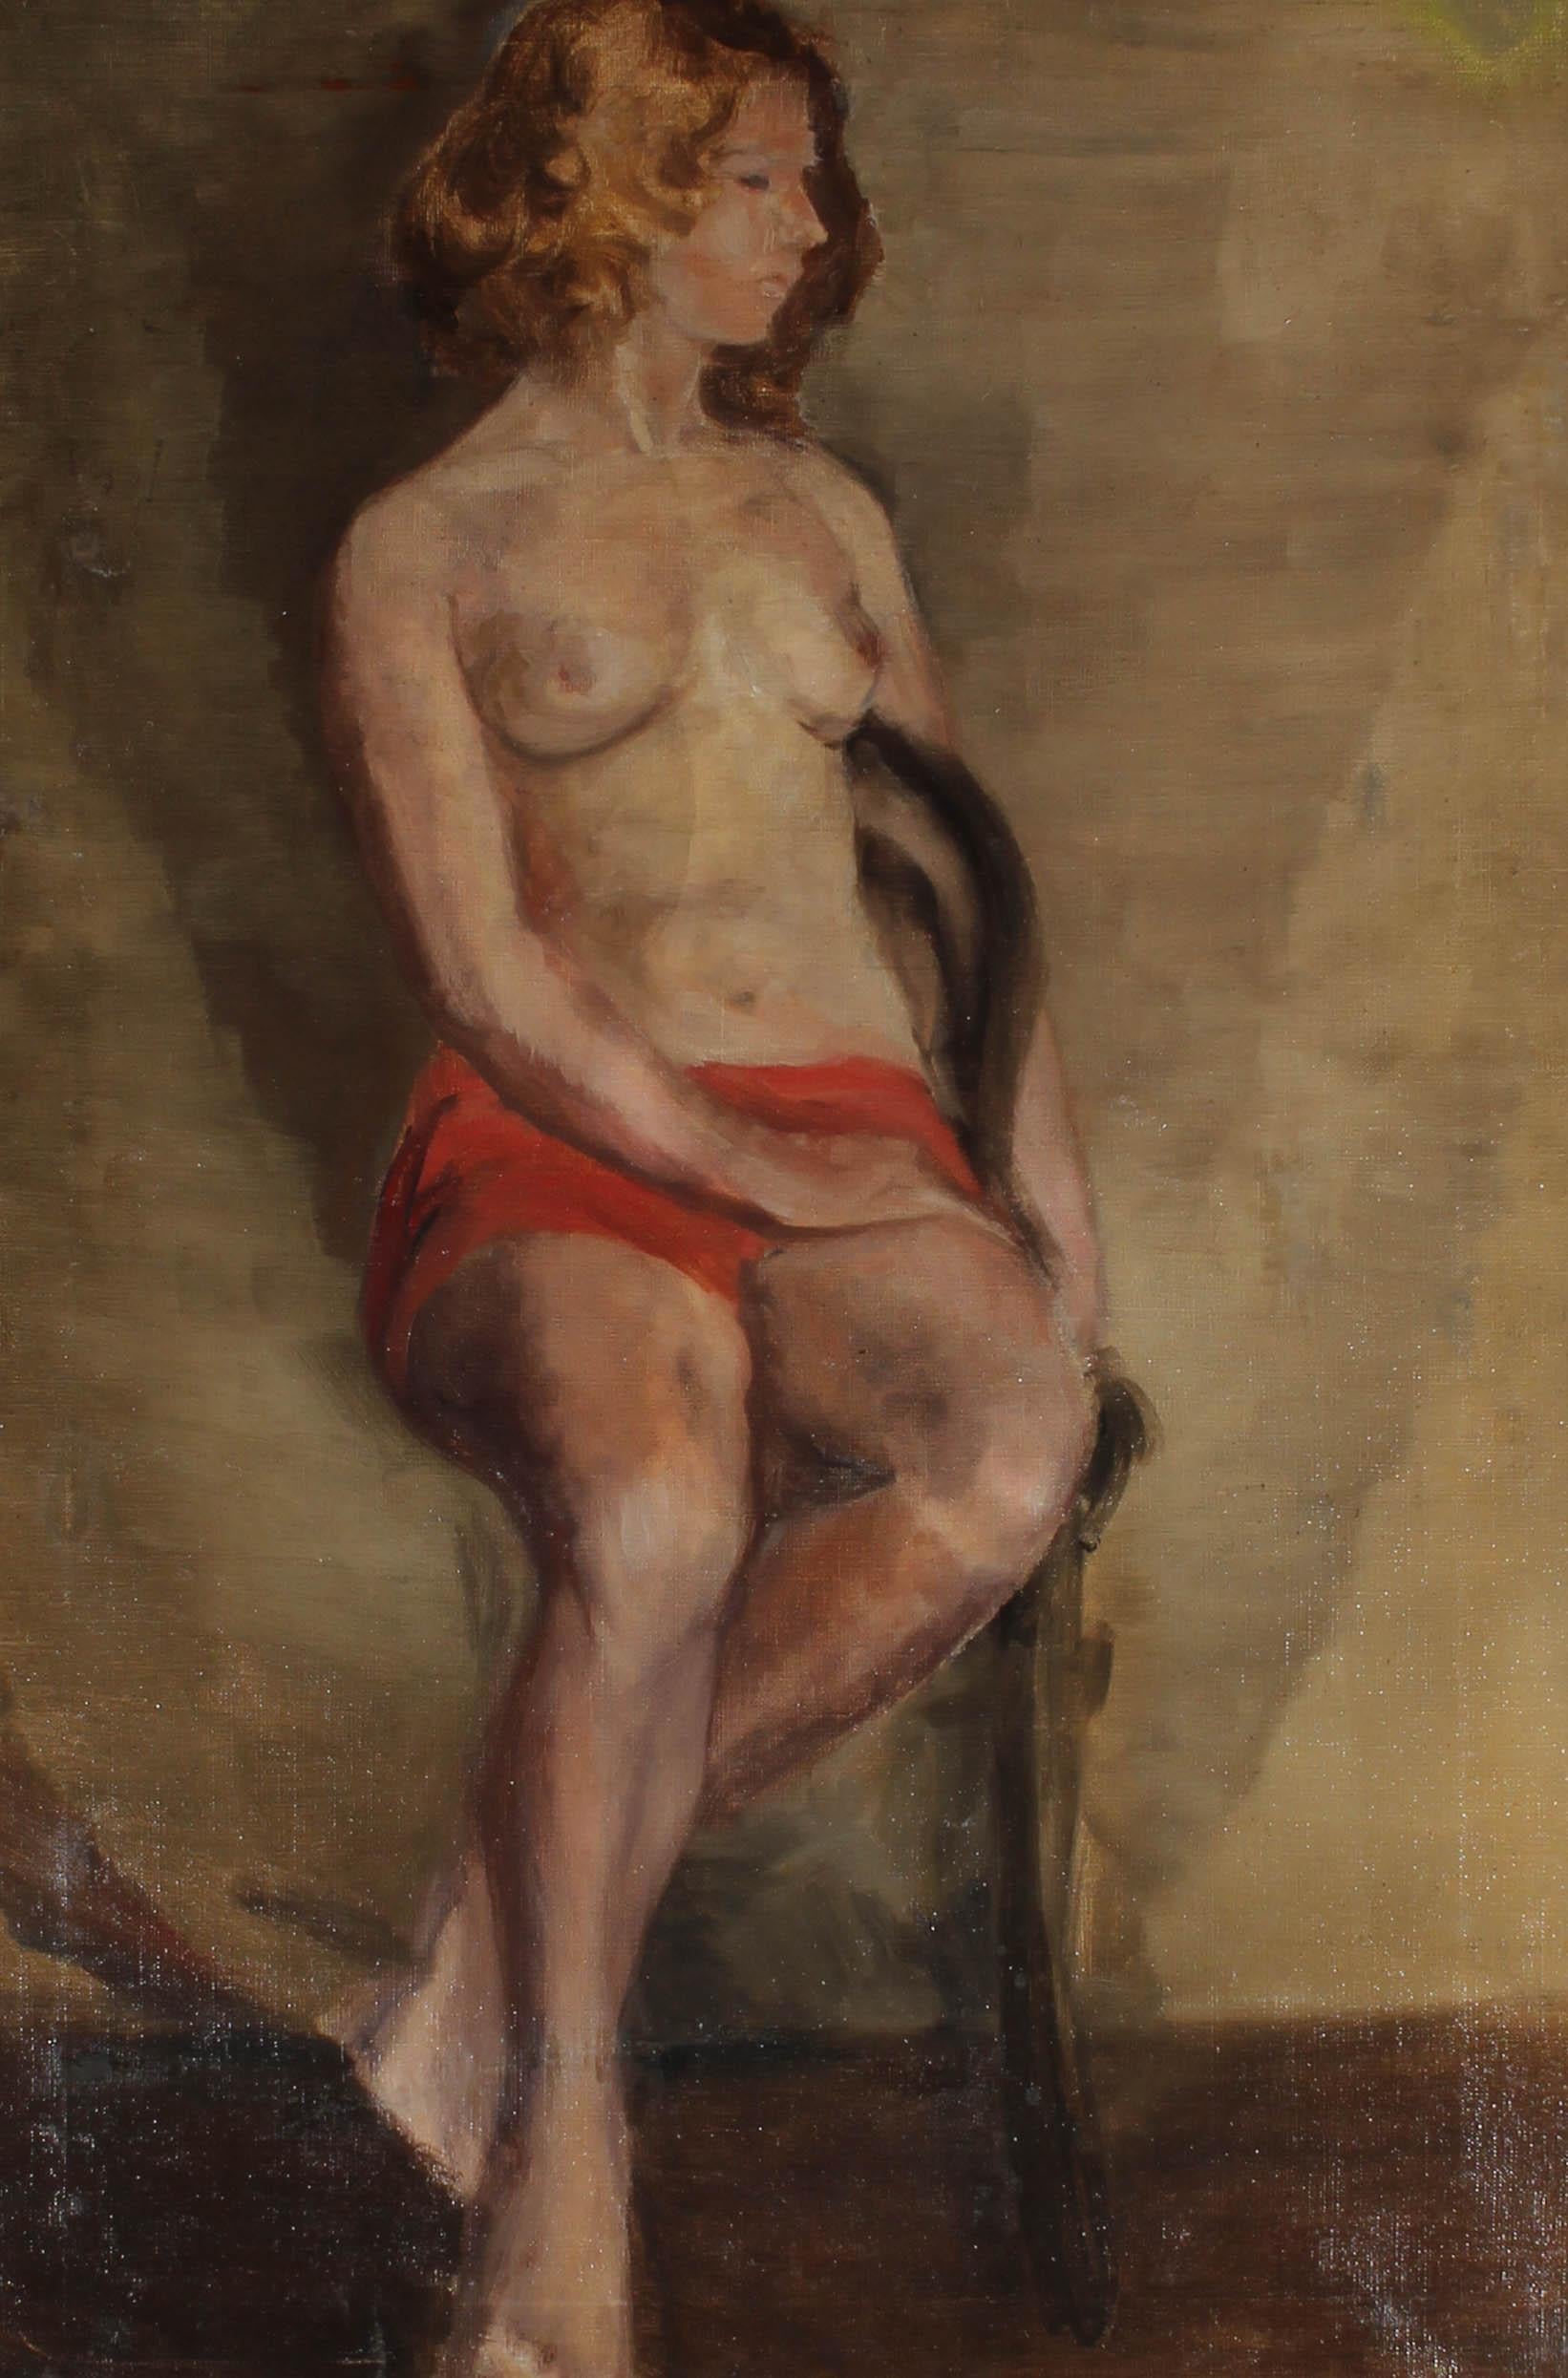 The beautiful mid-century oil depicts a partially nude model seated on a wooden chair. She wears red shorts that are a pop of colour against the dark background. The artist shows her with her head turned, showing the graceful profile of her face.